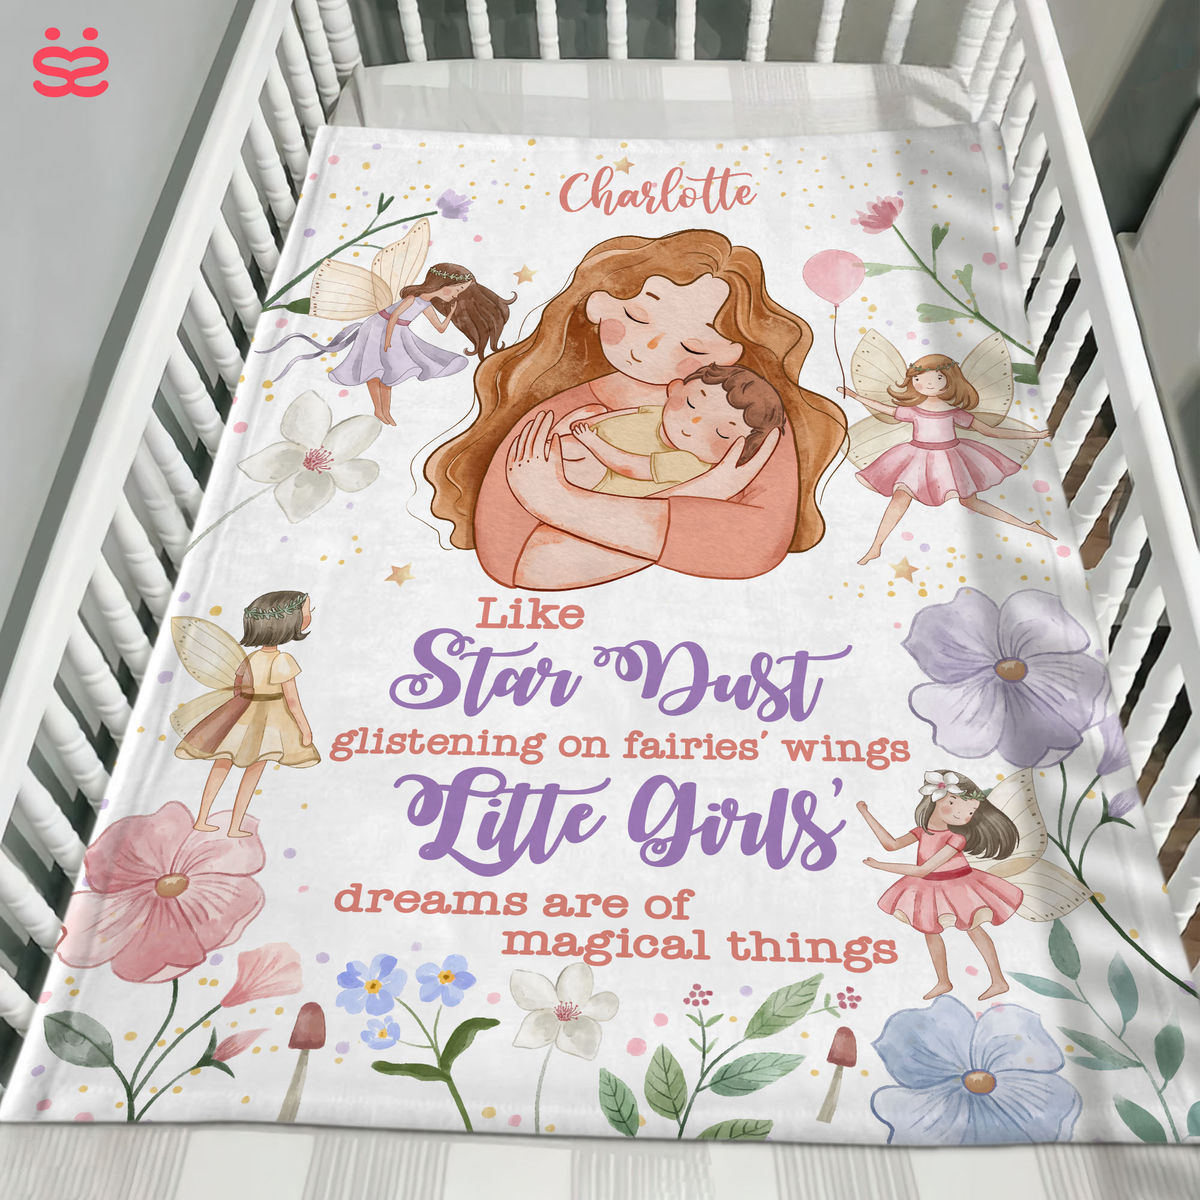 Gifts for Mom, Daughter - Little girls - Like stardust glistening on fairies’ wings, little girls dreams are of magical things - Blanket & Pillow